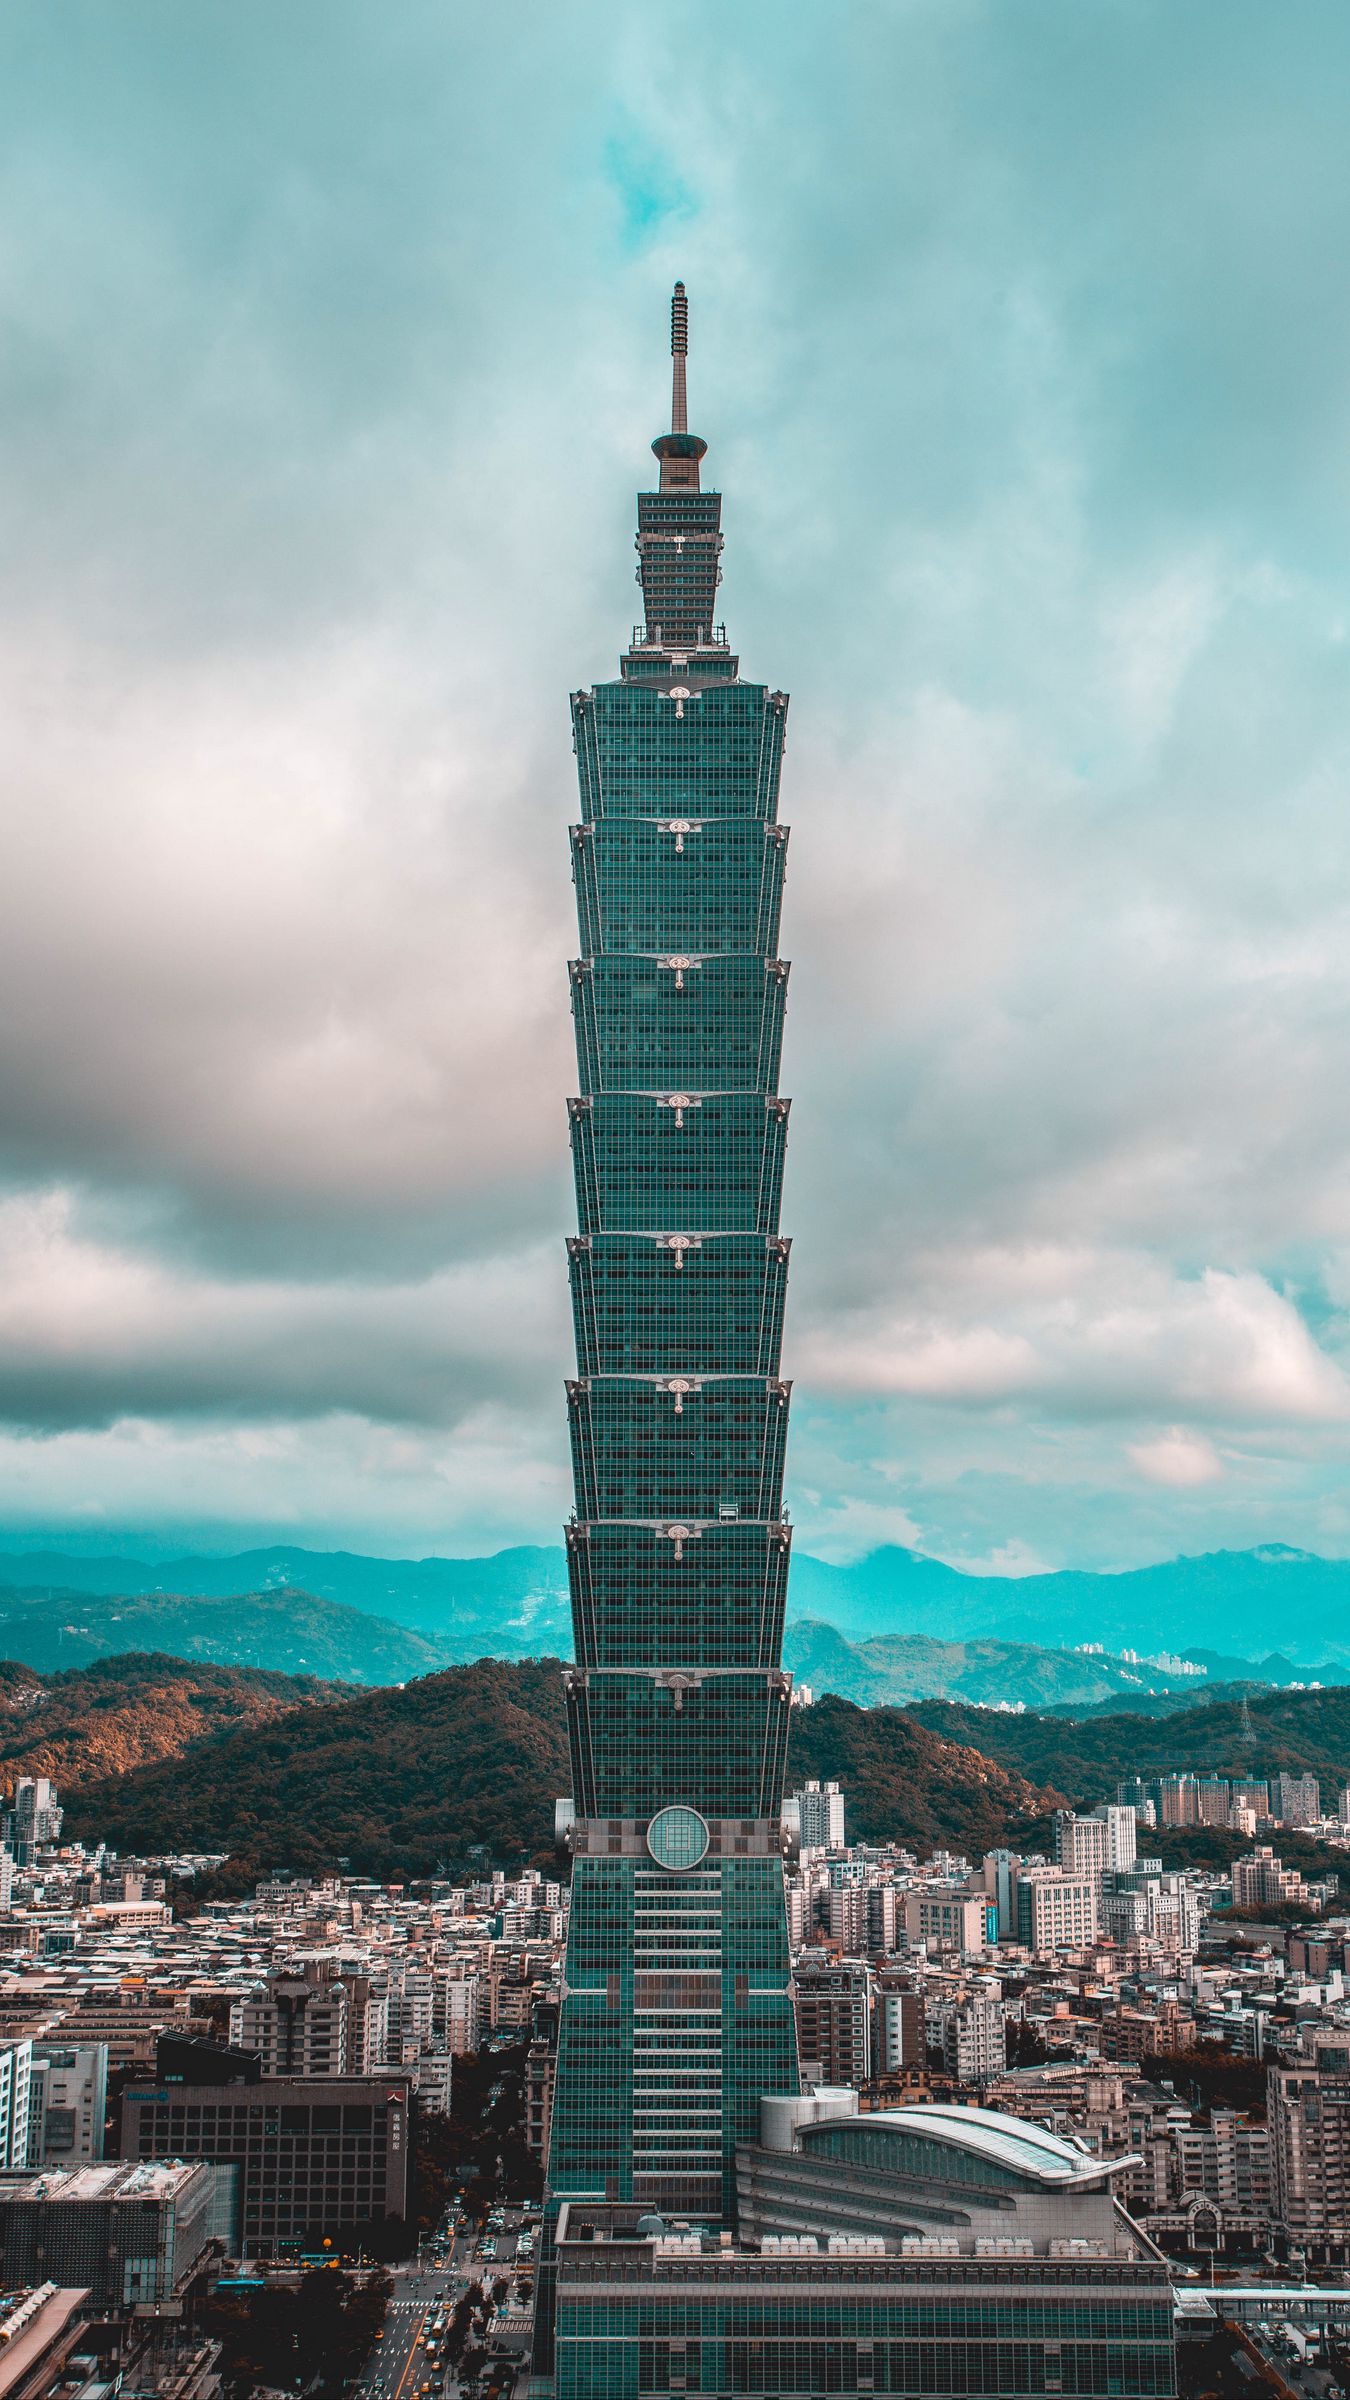 Download Wallpaper 1350x2400 Tower Building Architecture City Taipei Taiwan Iphone 8 7 6s 6 For Parallax Hd Background